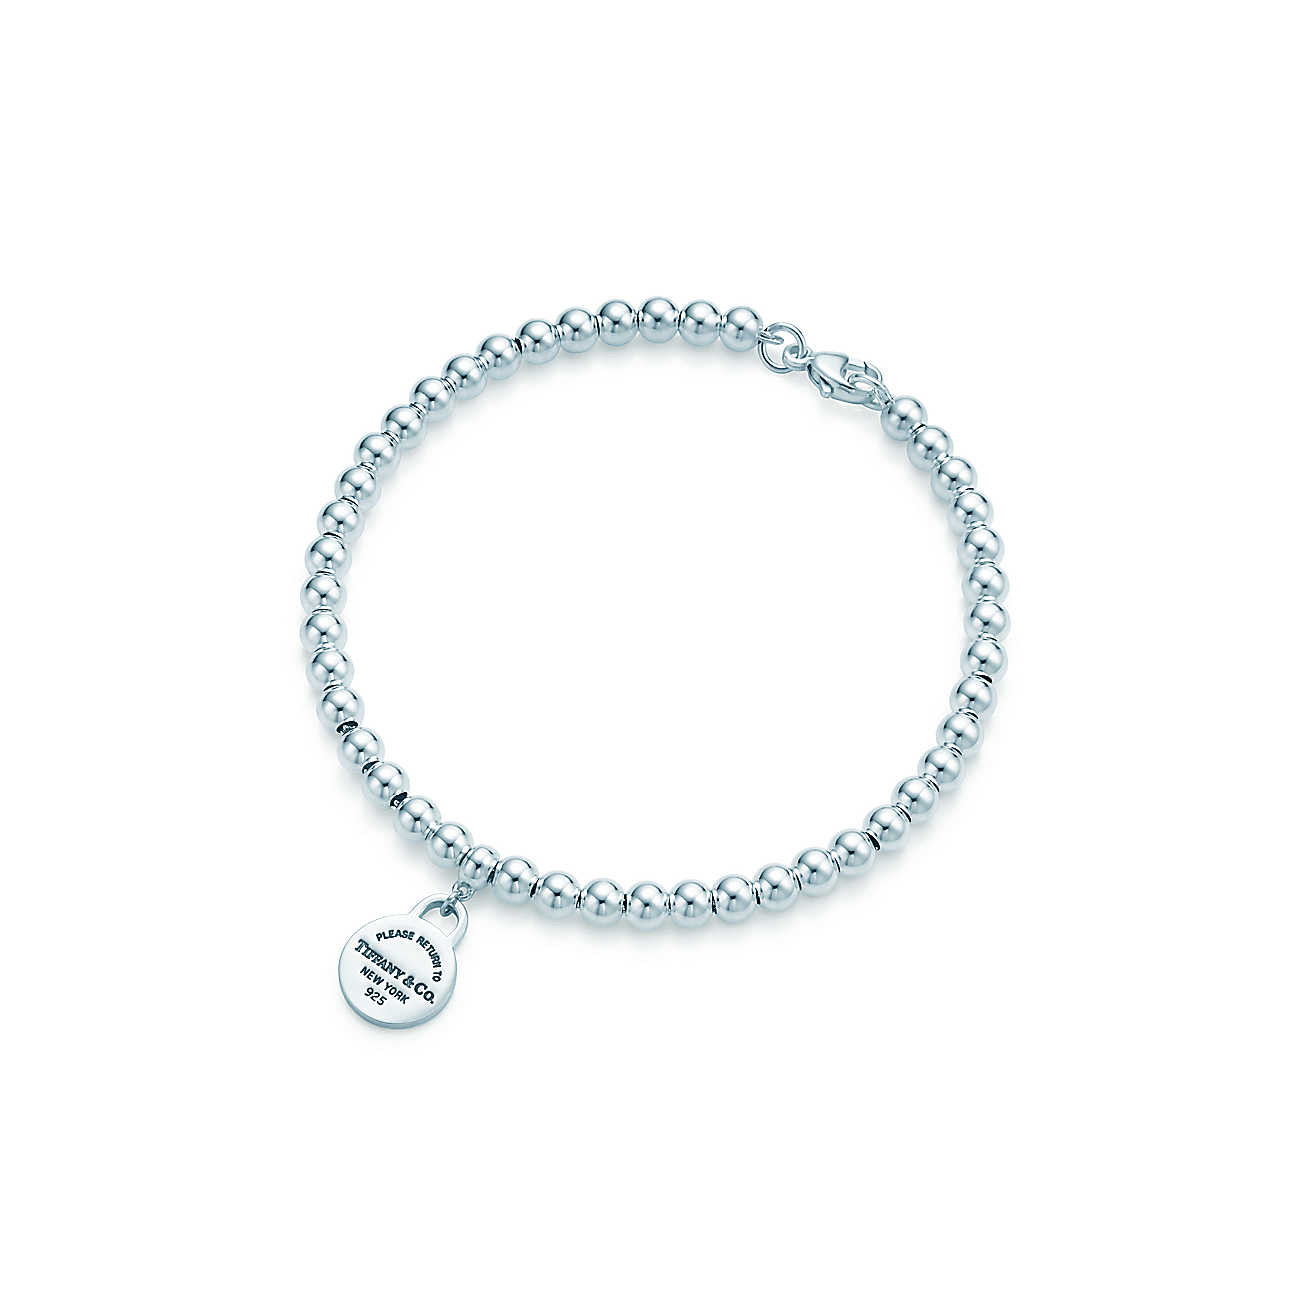 Tiffany Bead Bracelet
 Return to Tiffany™ mini round tag in sterling silver on a